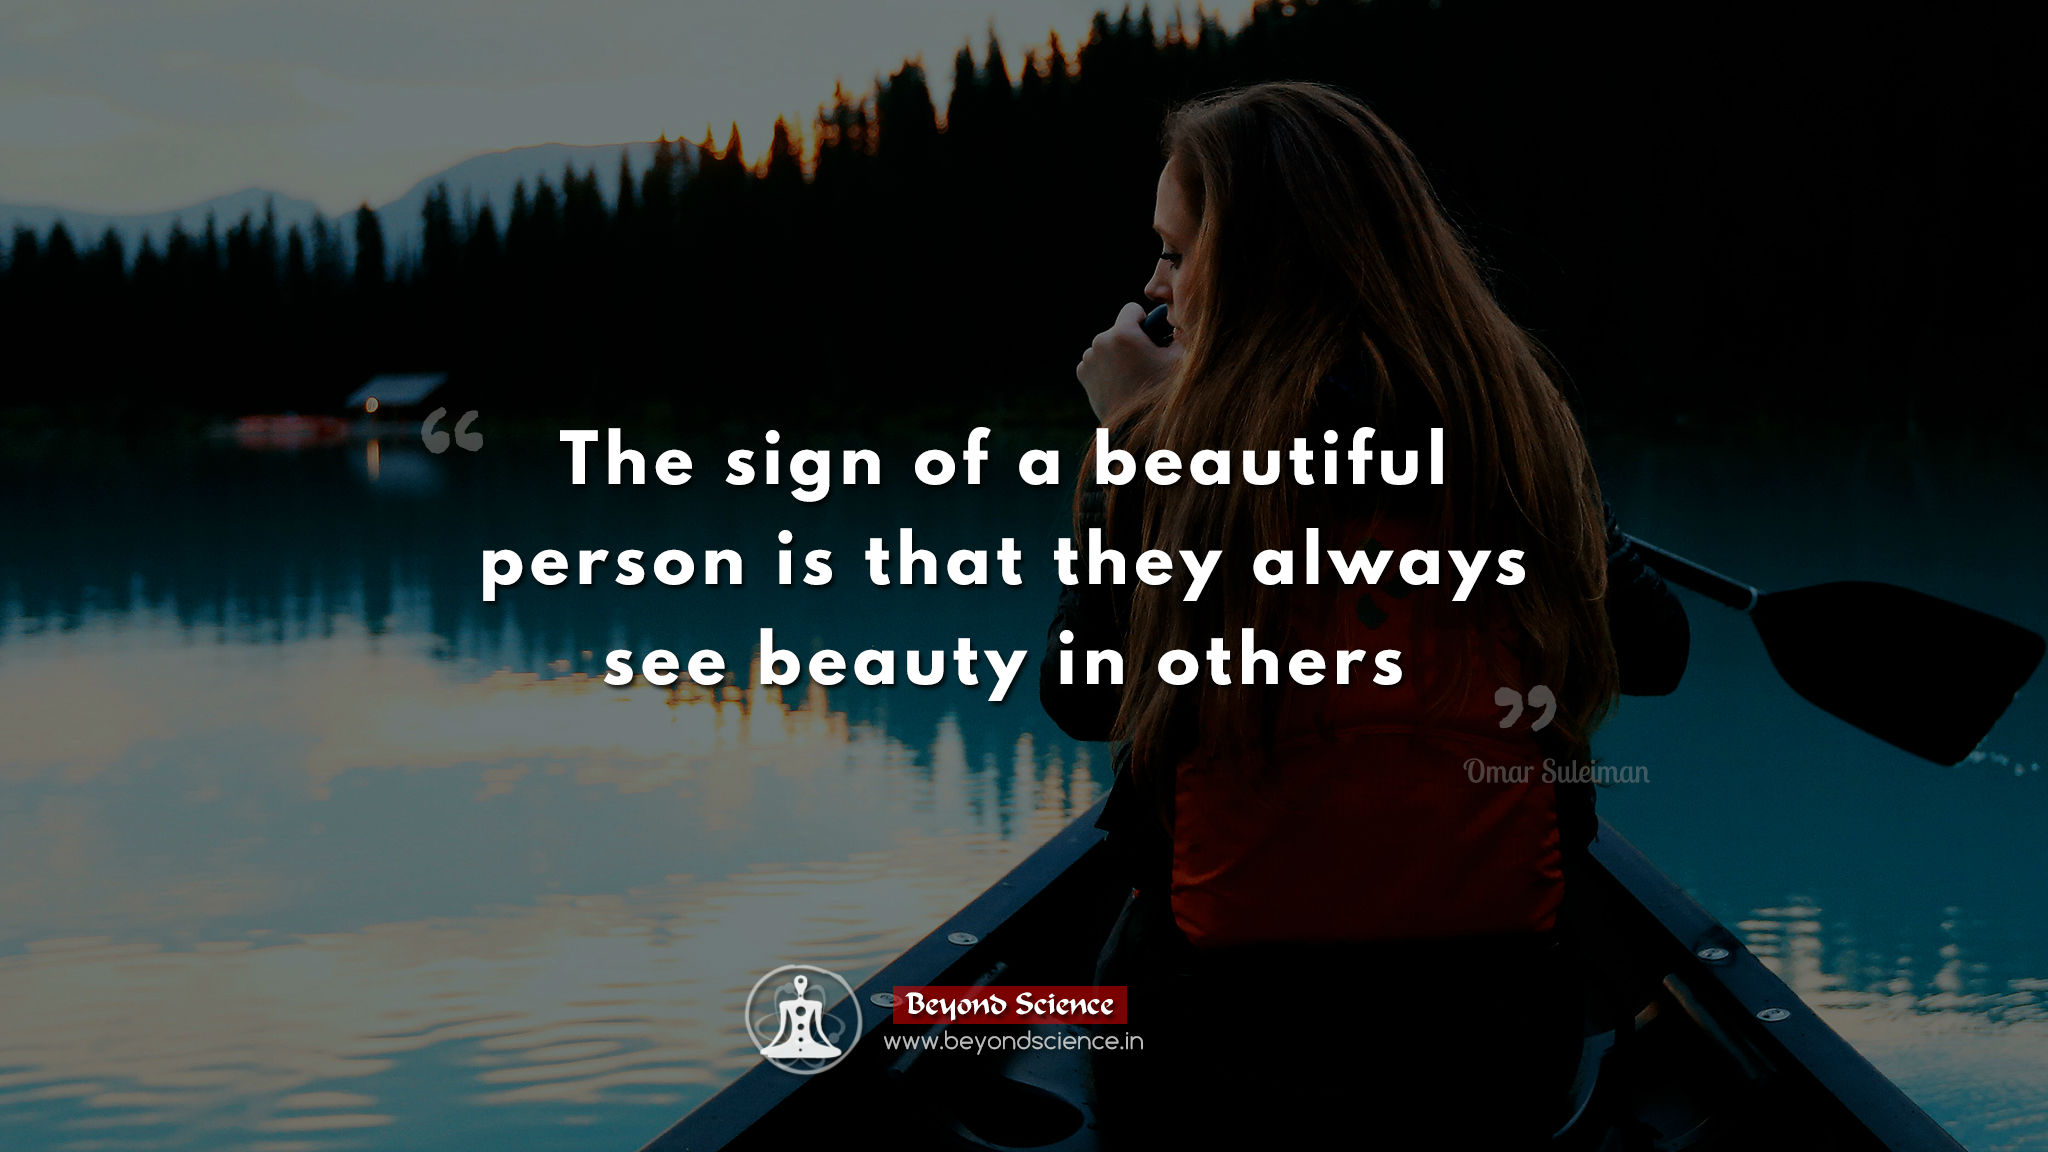 The sign of a beautiful person is that they always see beauty in others.